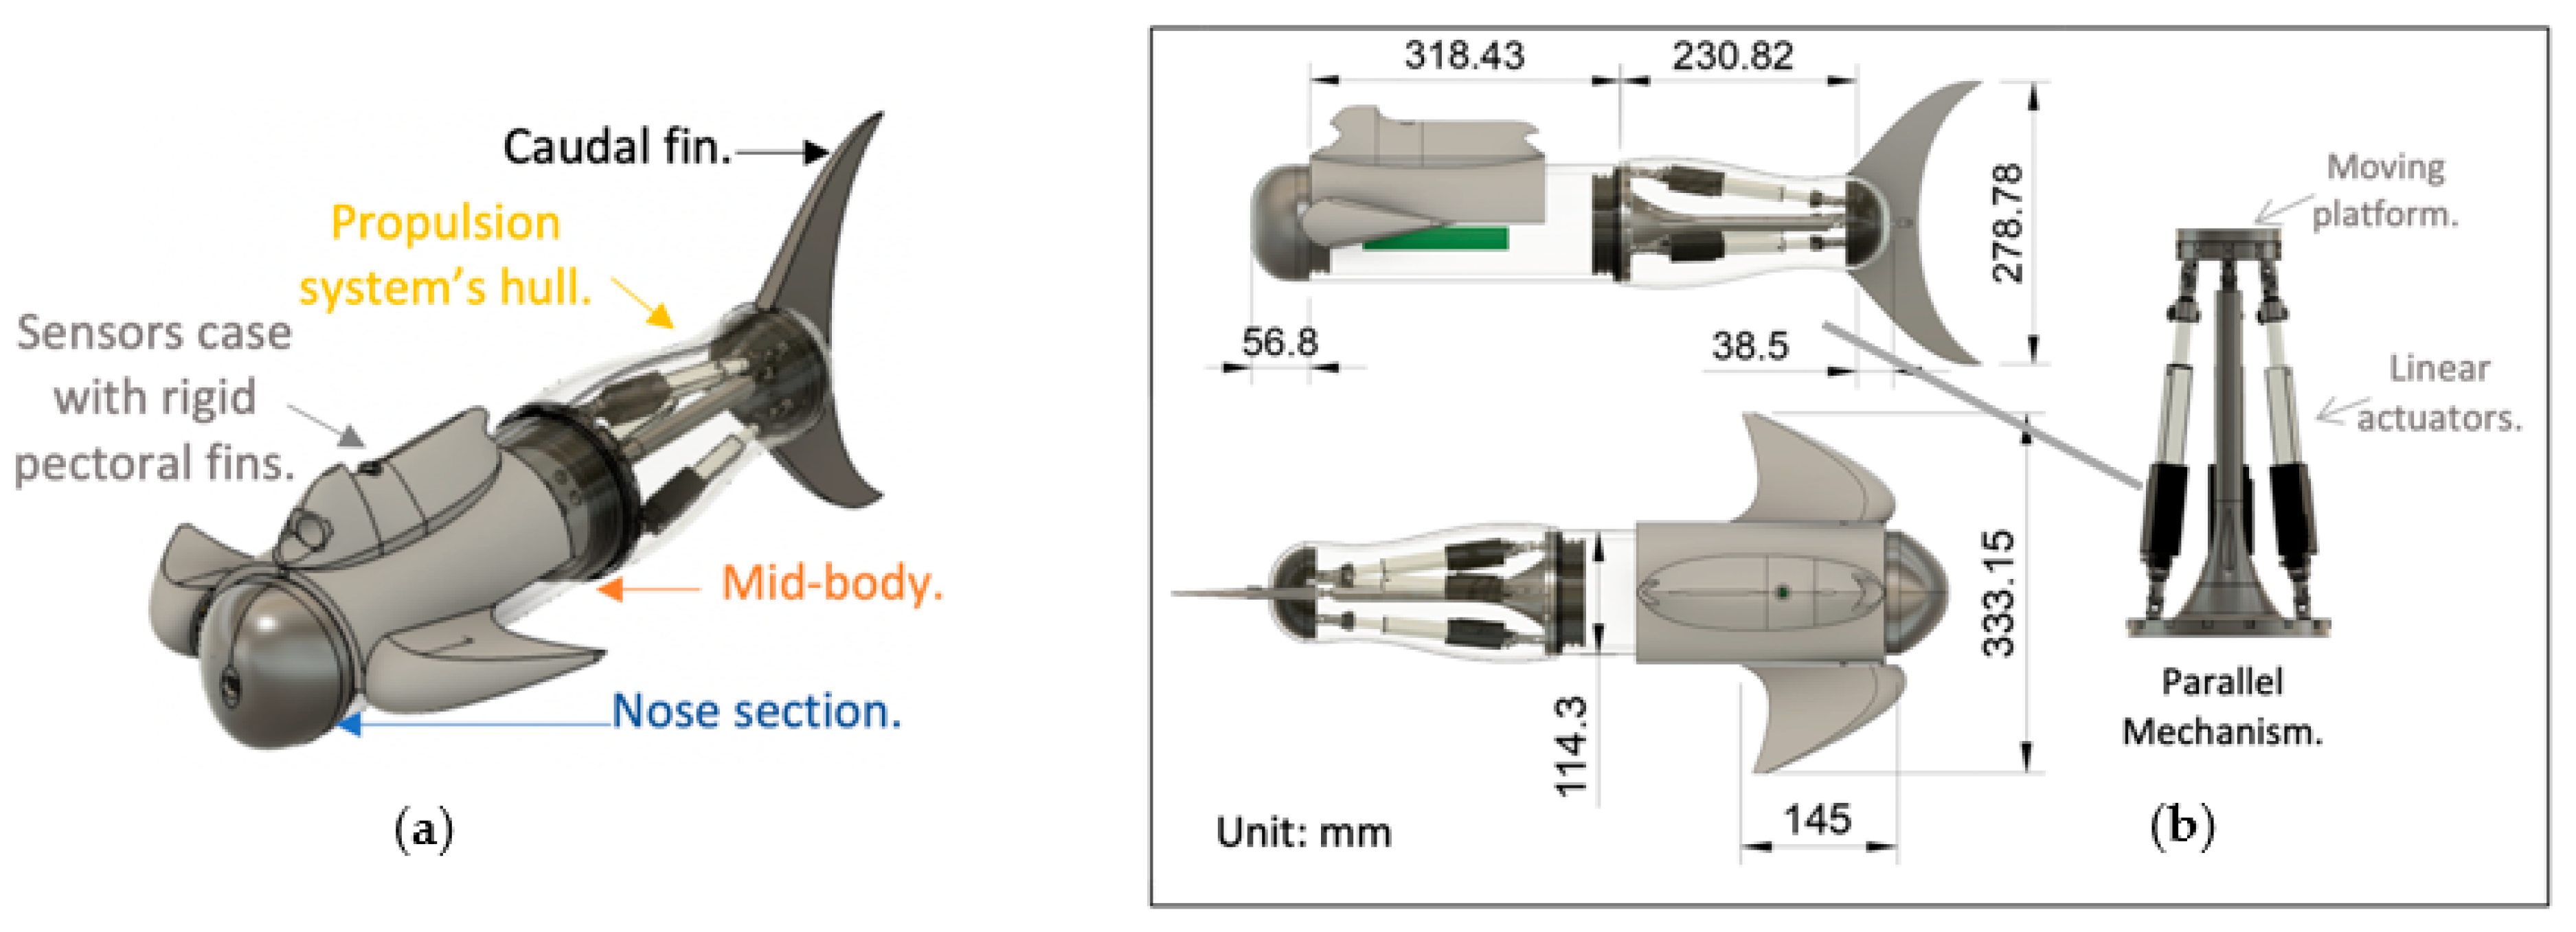 Electronics | Free Full-Text | Modeling, Trajectory Analysis and Waypoint  Guidance System of a Biomimetic Underwater Vehicle Based on the Flapping  Performance of Its Propulsion System